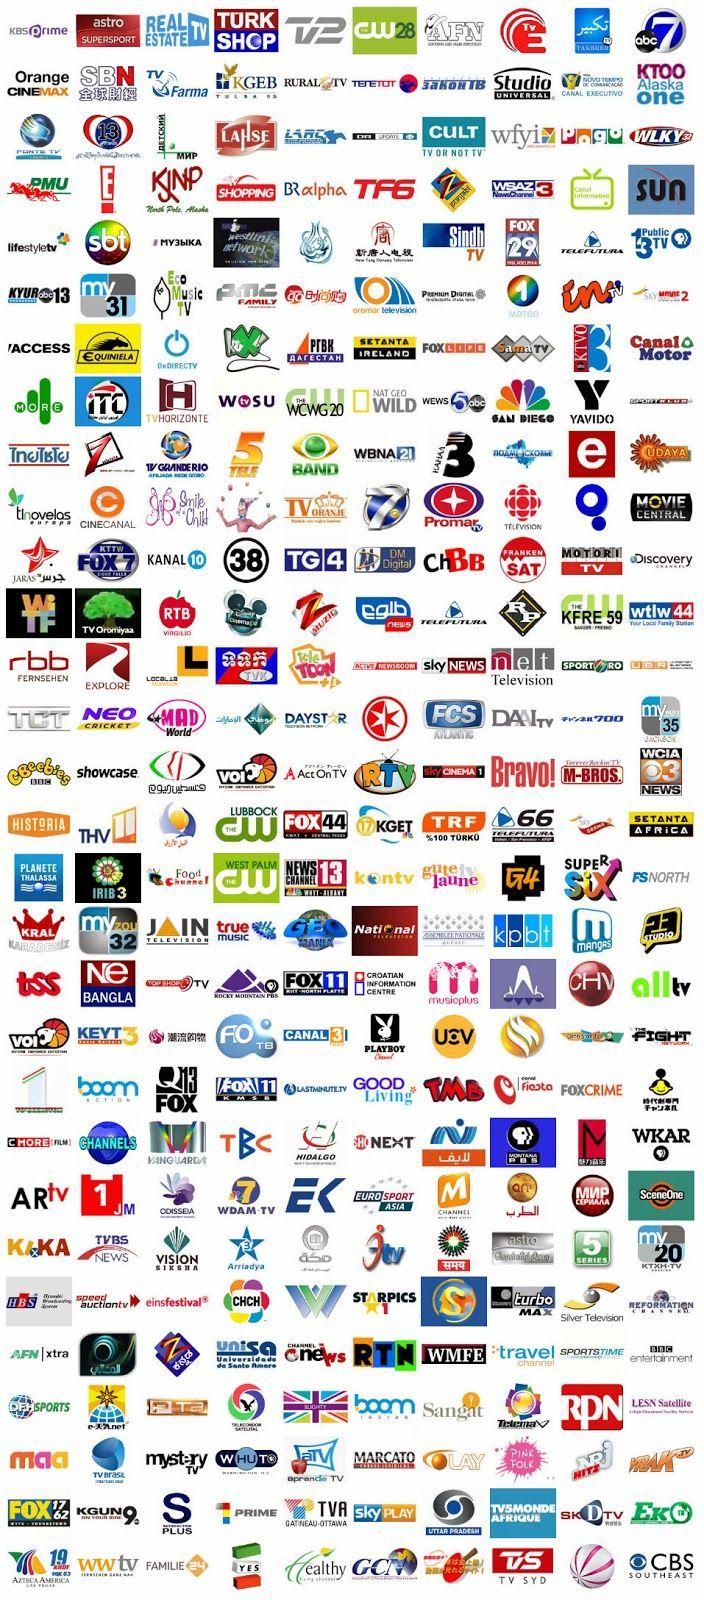 News Channel Logo - TV Channel Logos and Names | Logos | Pinterest | Tv channel logo ...